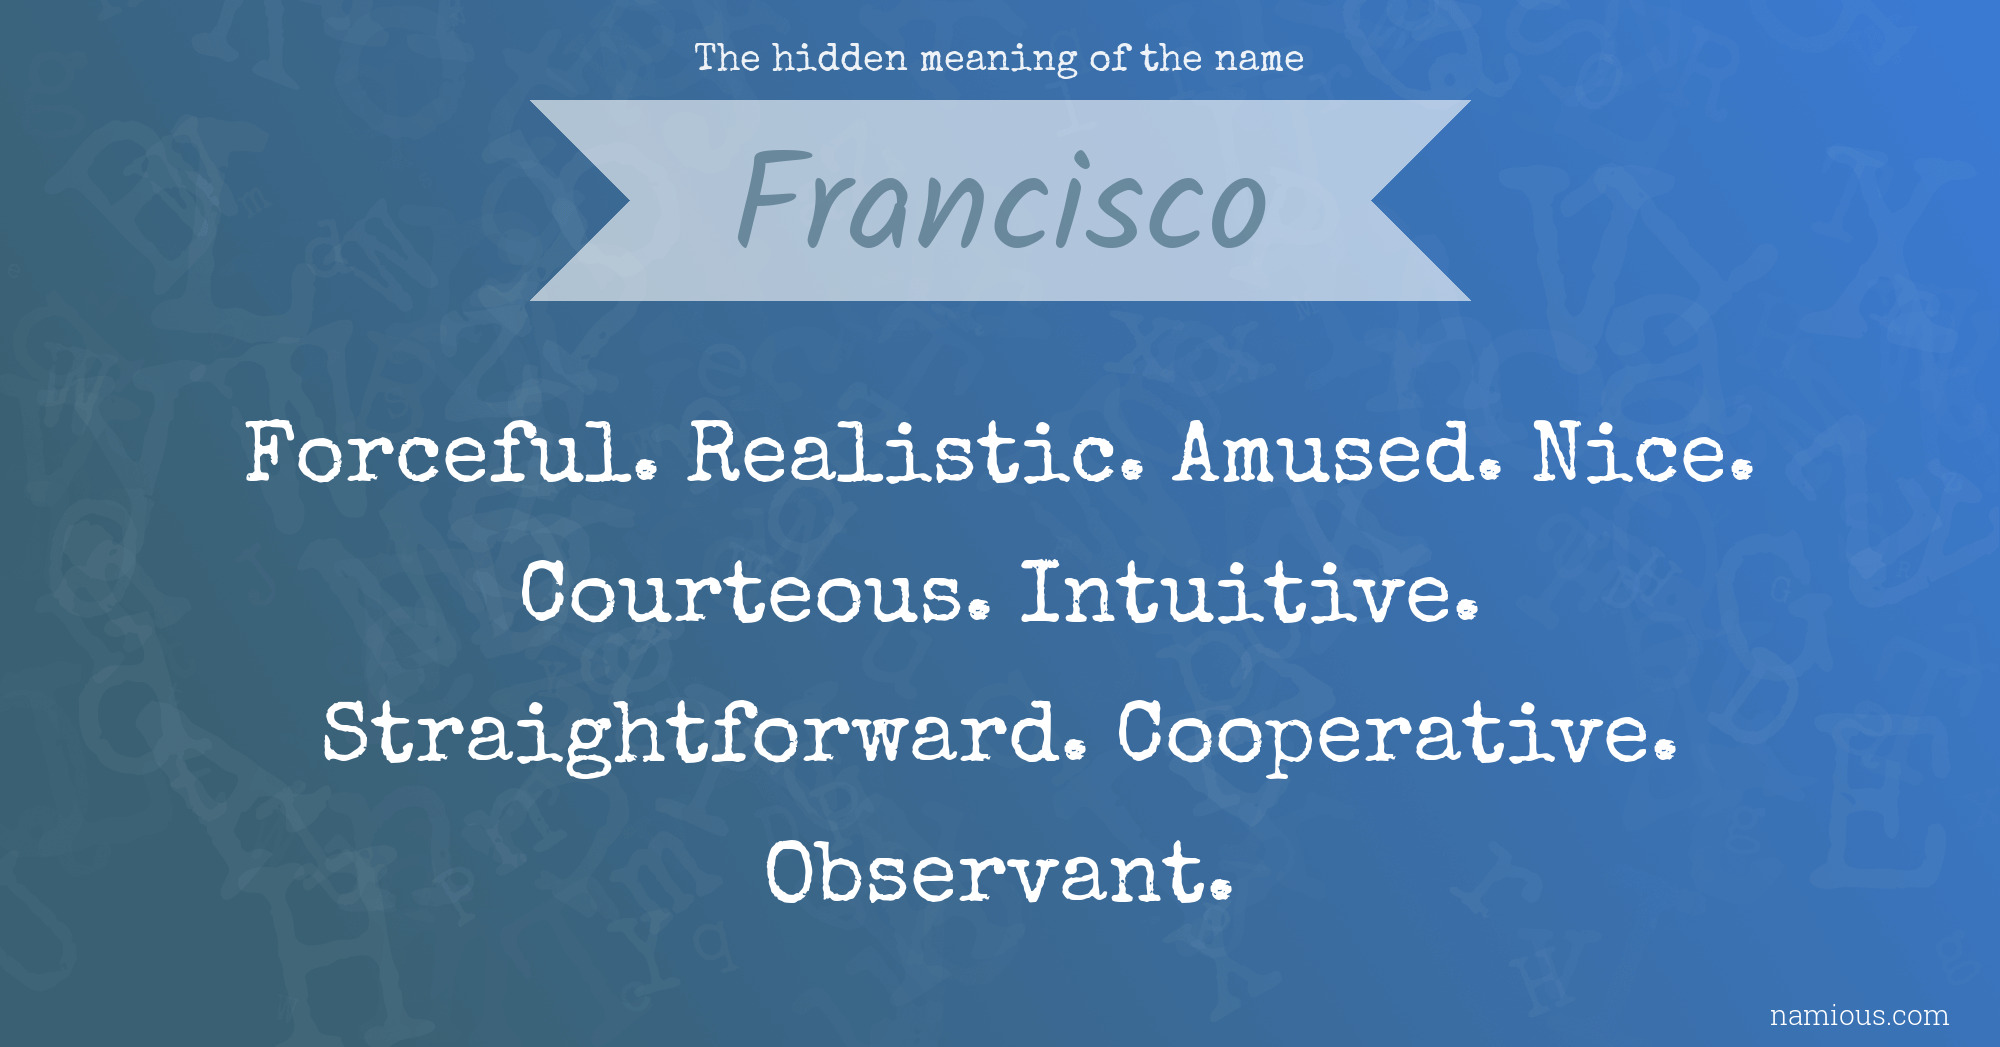 The hidden meaning of the name Francisco